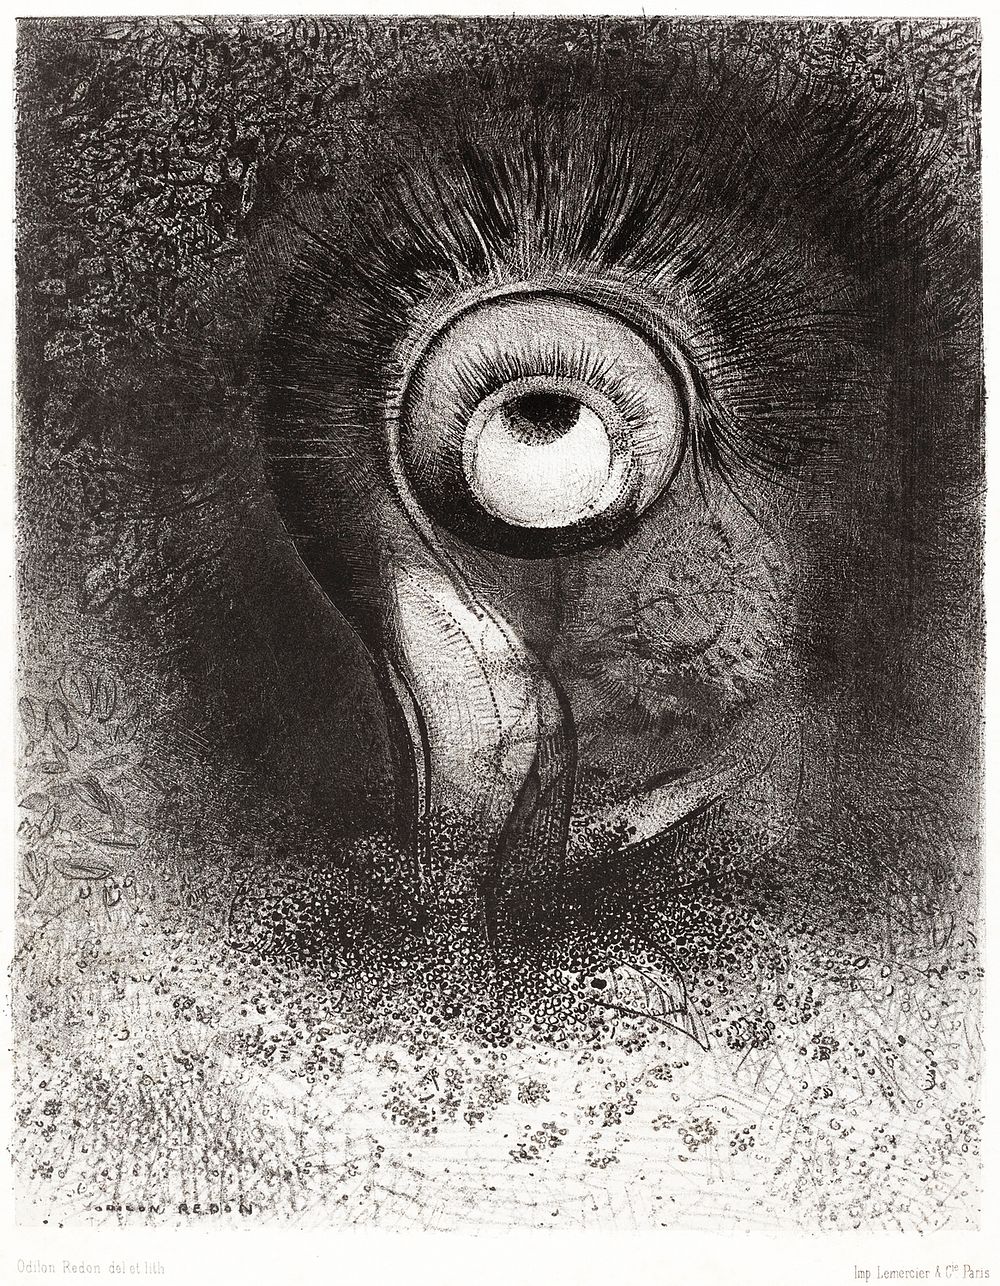 There Was Perhaps a First Vision Attempted by the Flower (1883) by Odilon Redon. Original from the National Gallery of Art.…